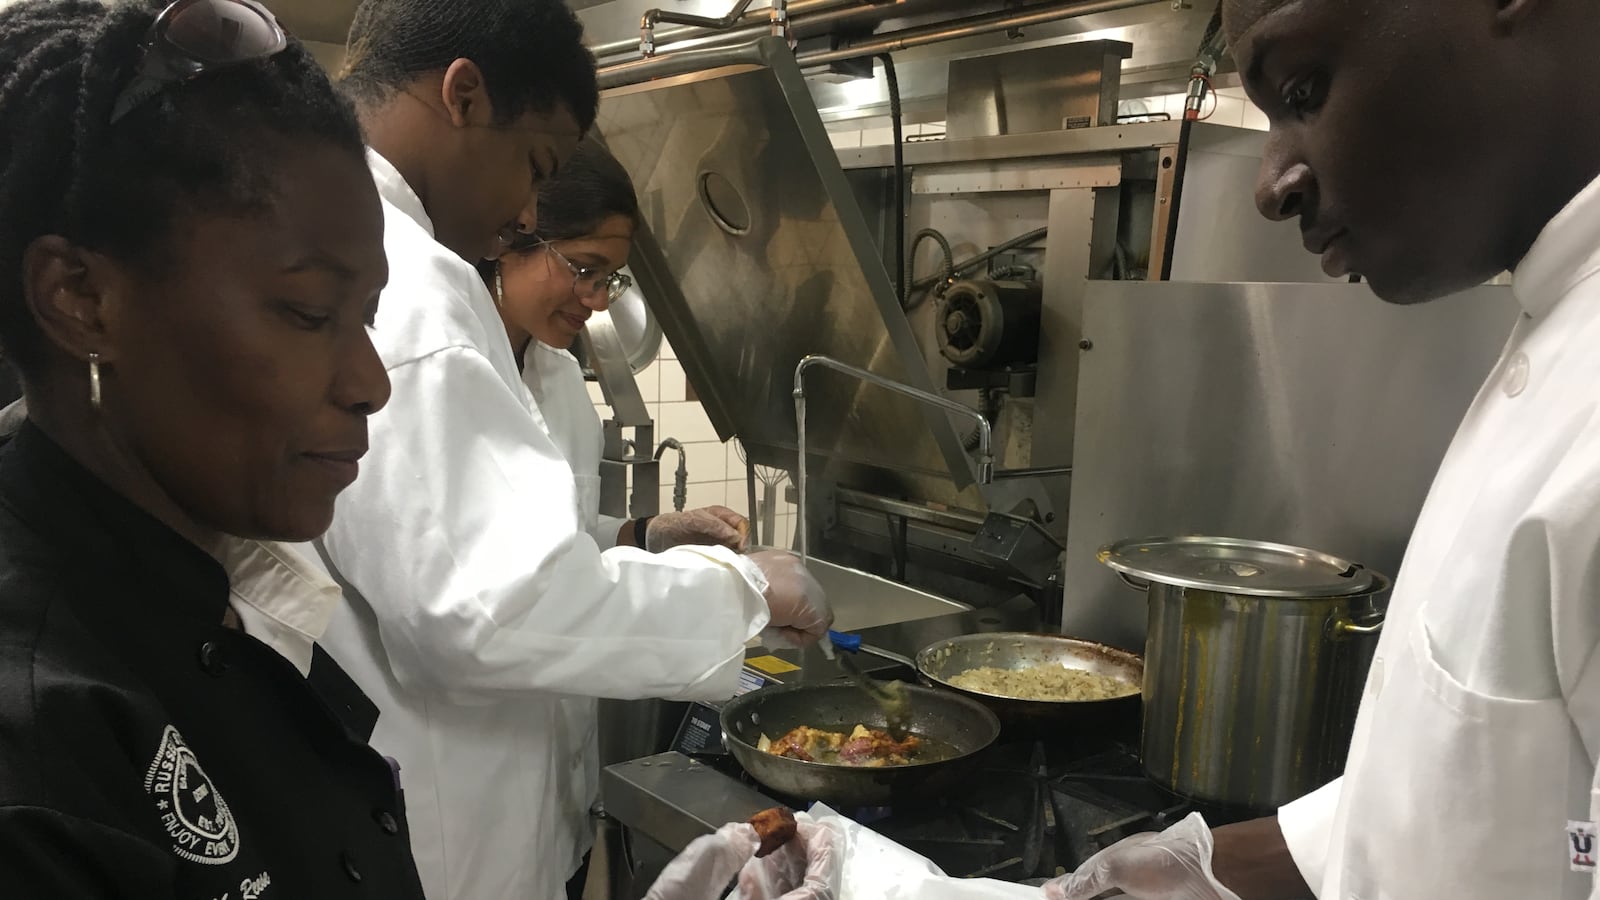 Marquita Reese, a math teacher at Frederick Douglass Academy for Young Men, works with students to cook vegetables grown in the school's greenhouse.